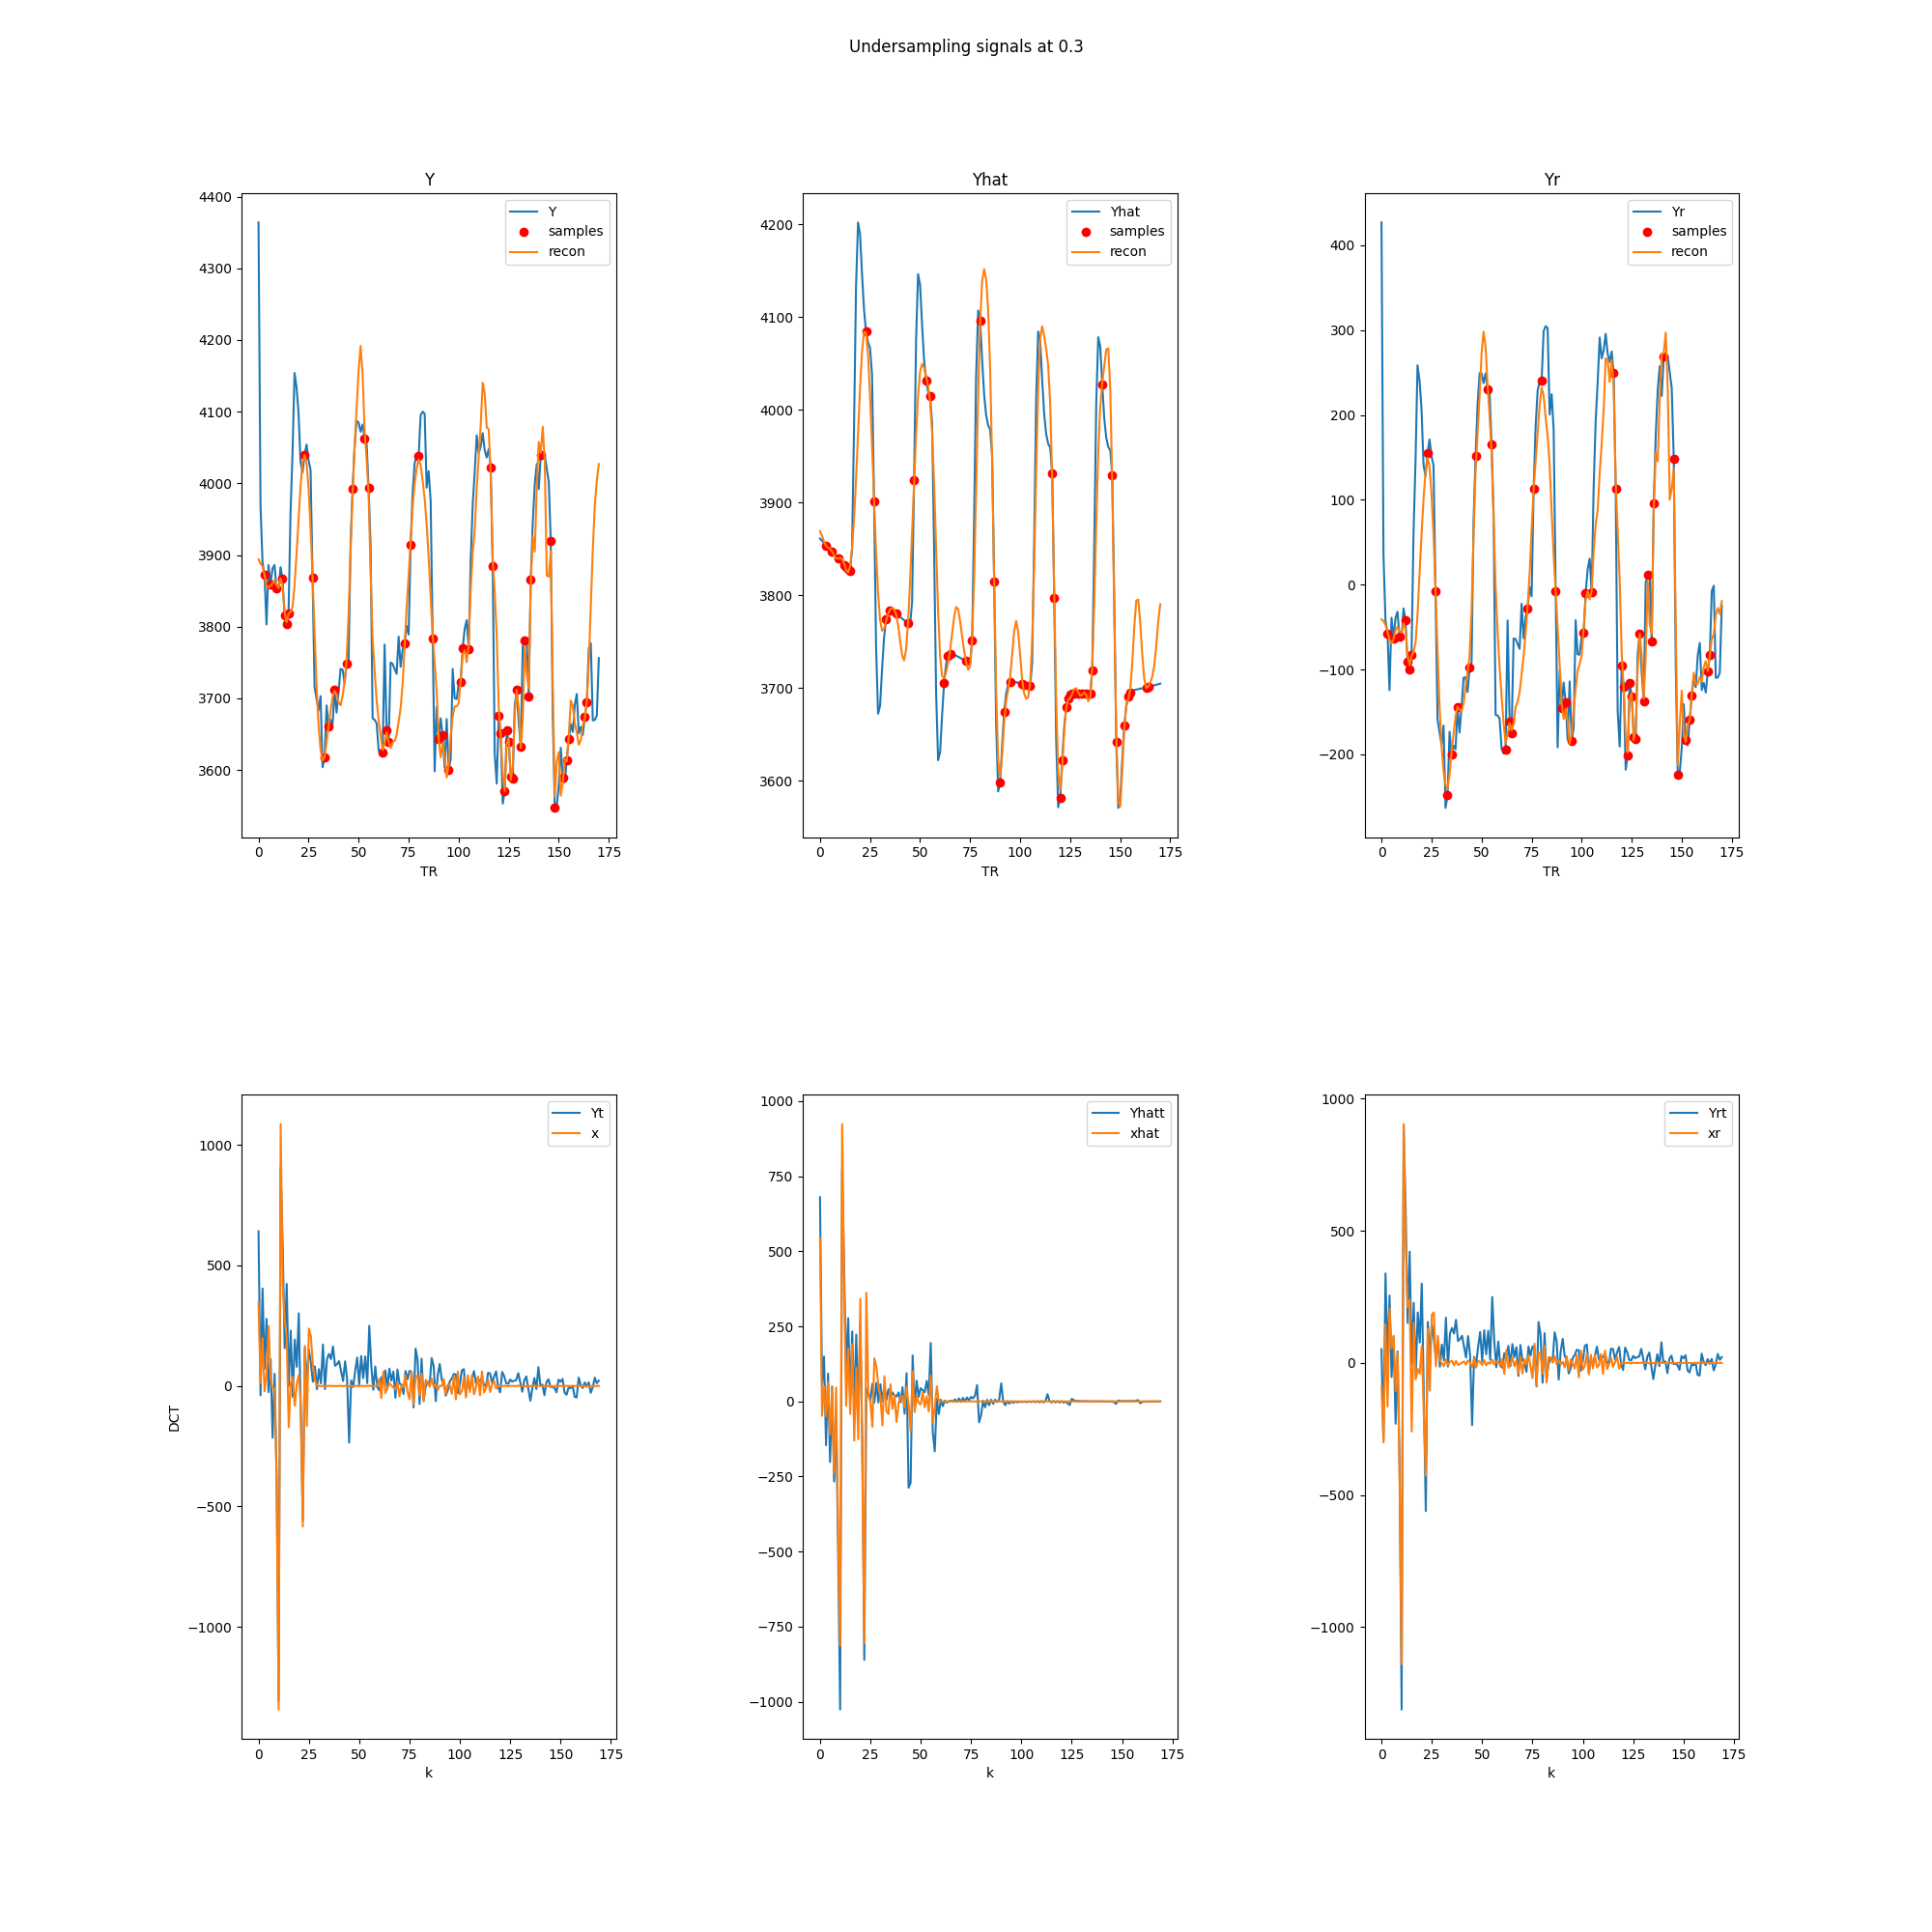 compressed sensing from 30% subsampling using the BSBL-BO algorithm